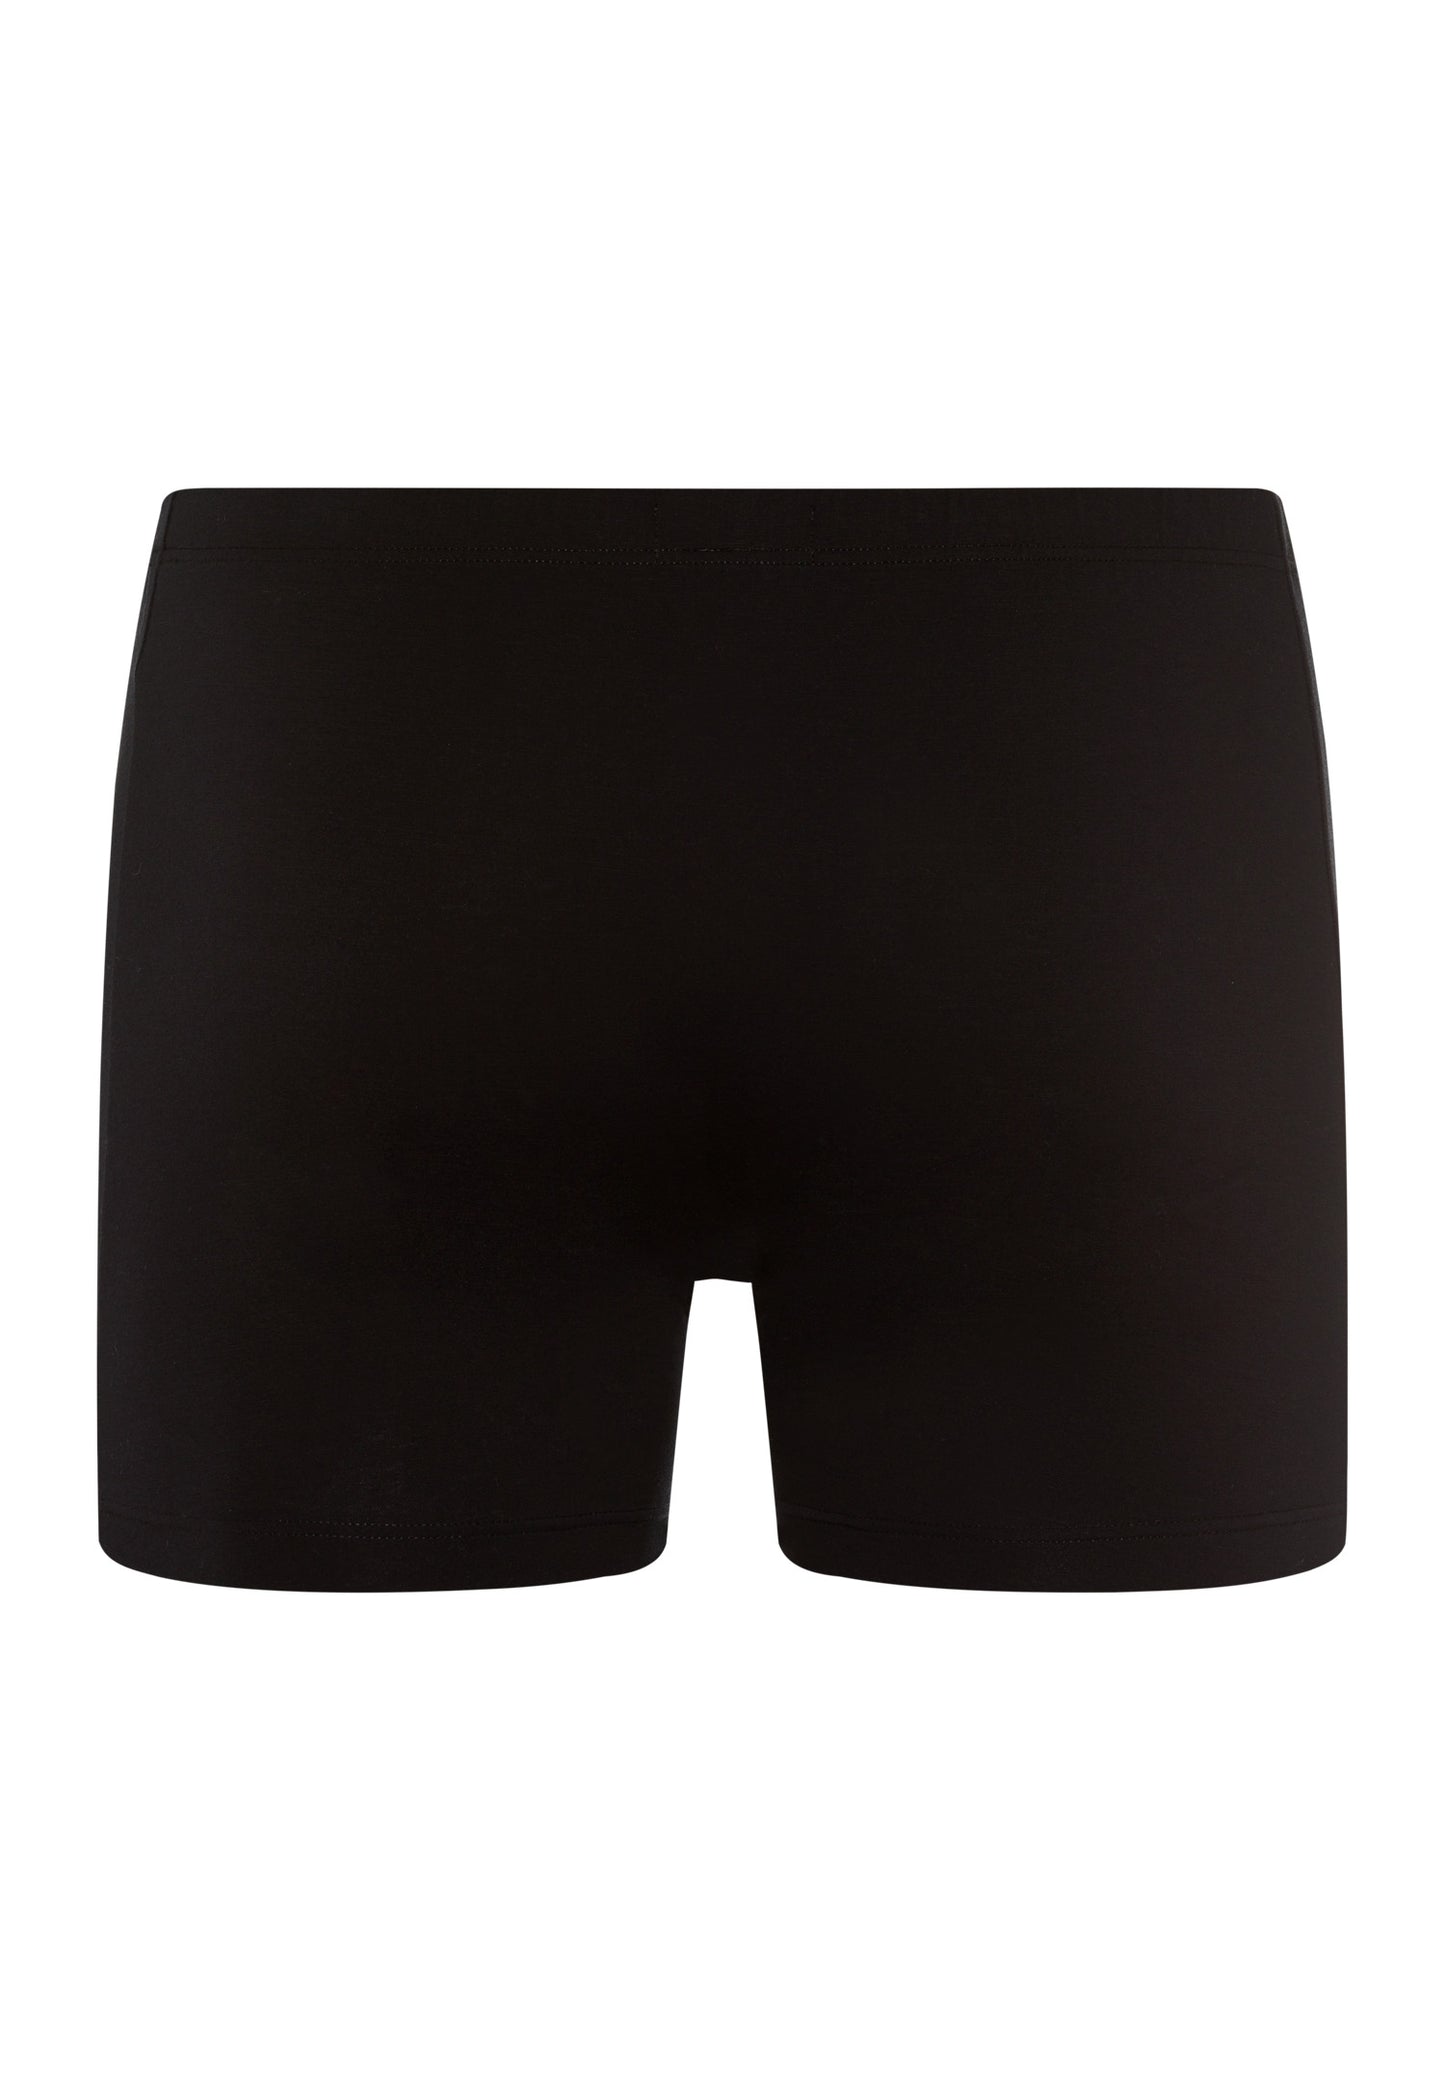 HANRO Black Cotton Sensation brief with buttoned fly